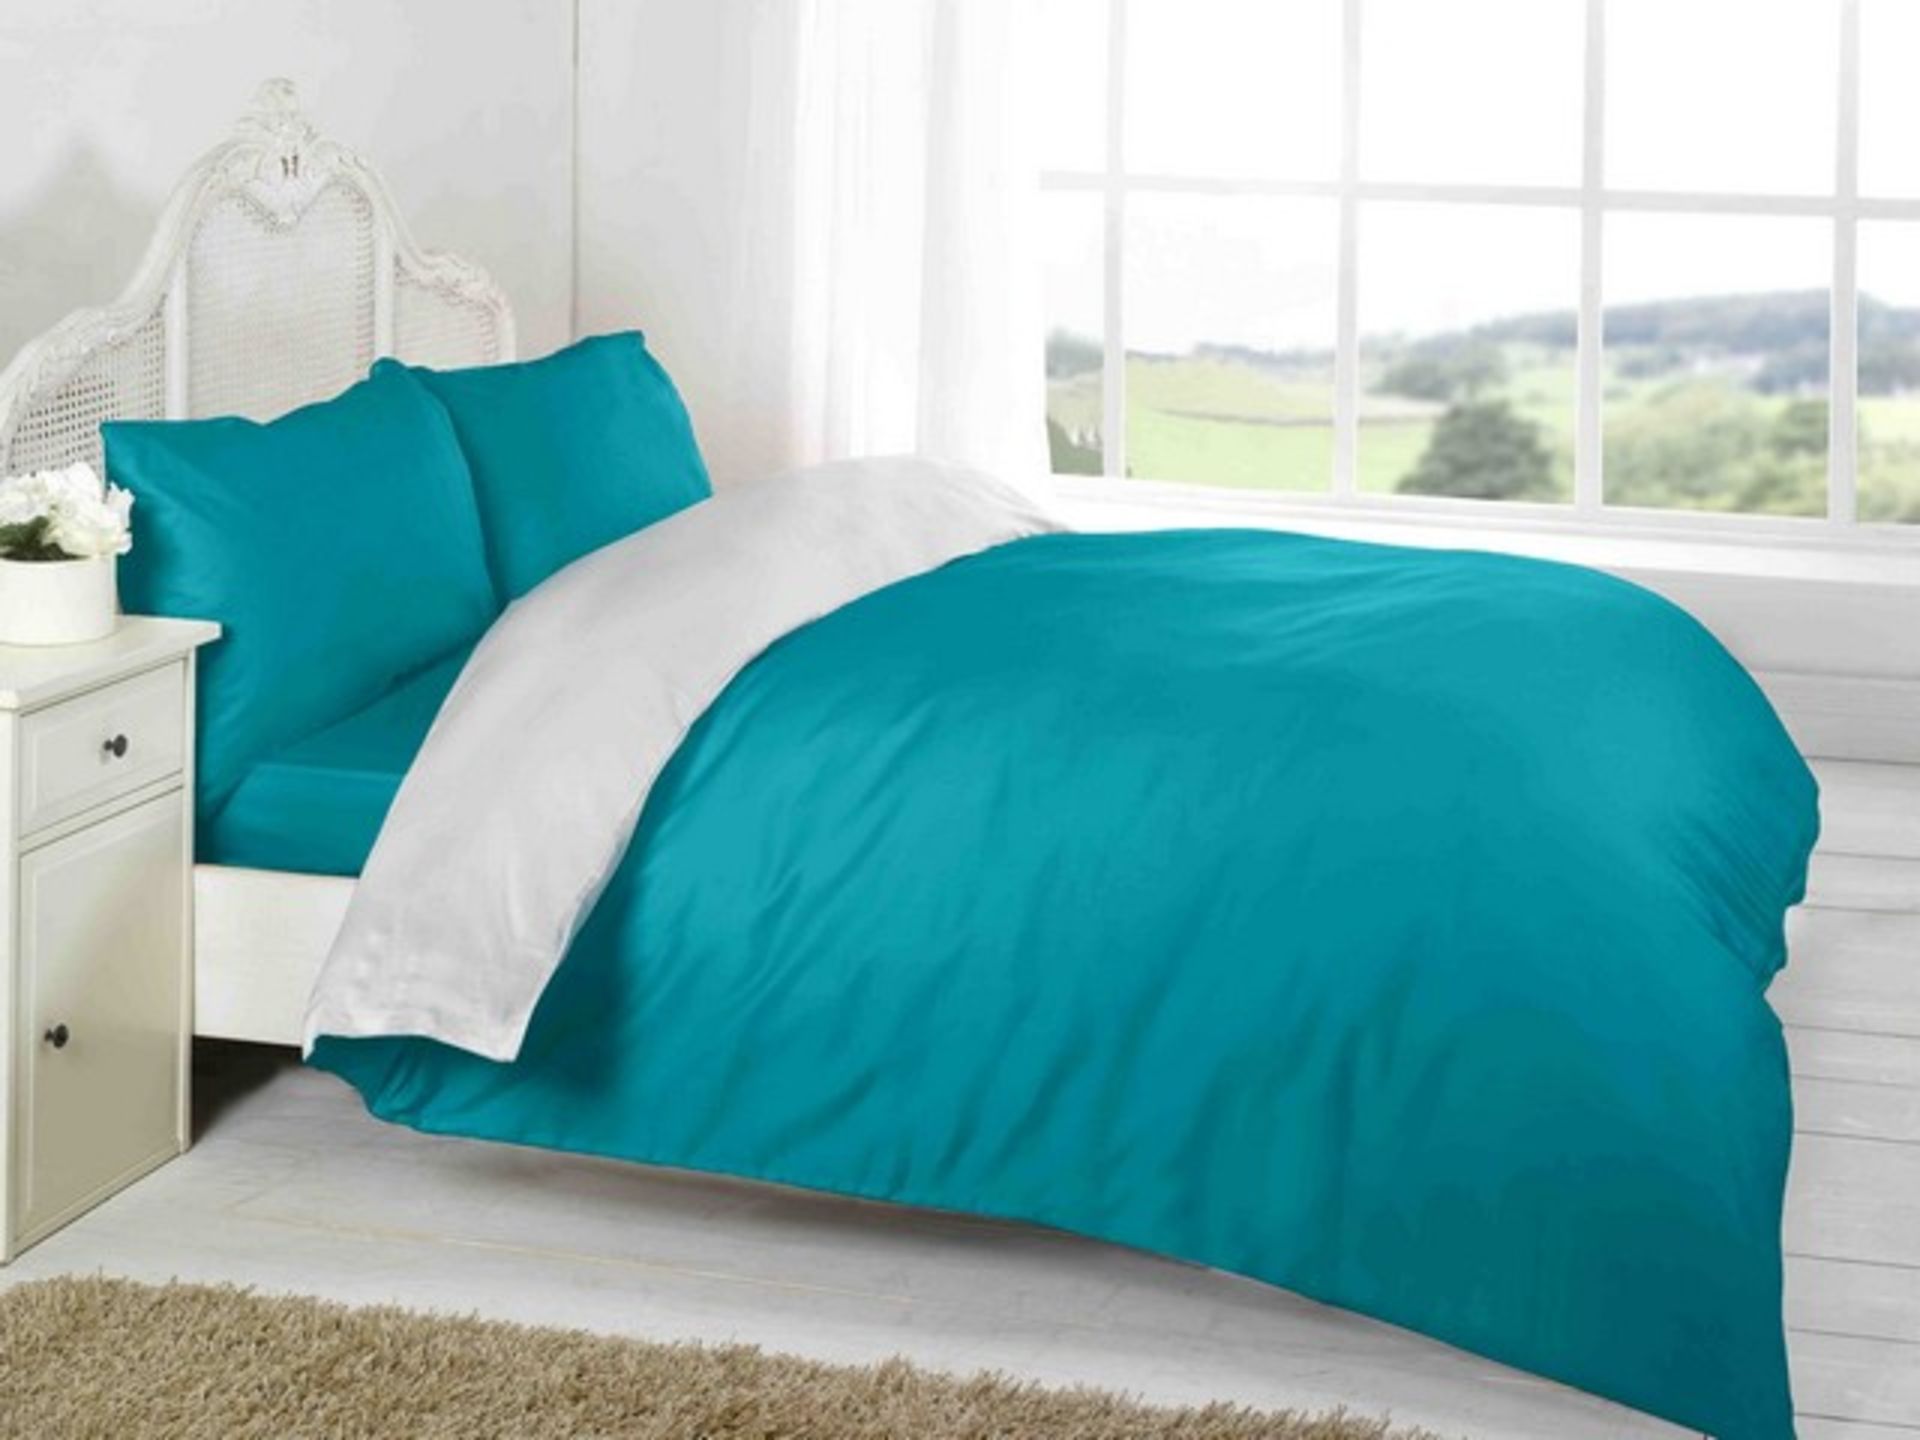 V Brand New King Size Complete Teal/White Reversible Bed Set with Duvet Cover - 2 Pillow Cases and